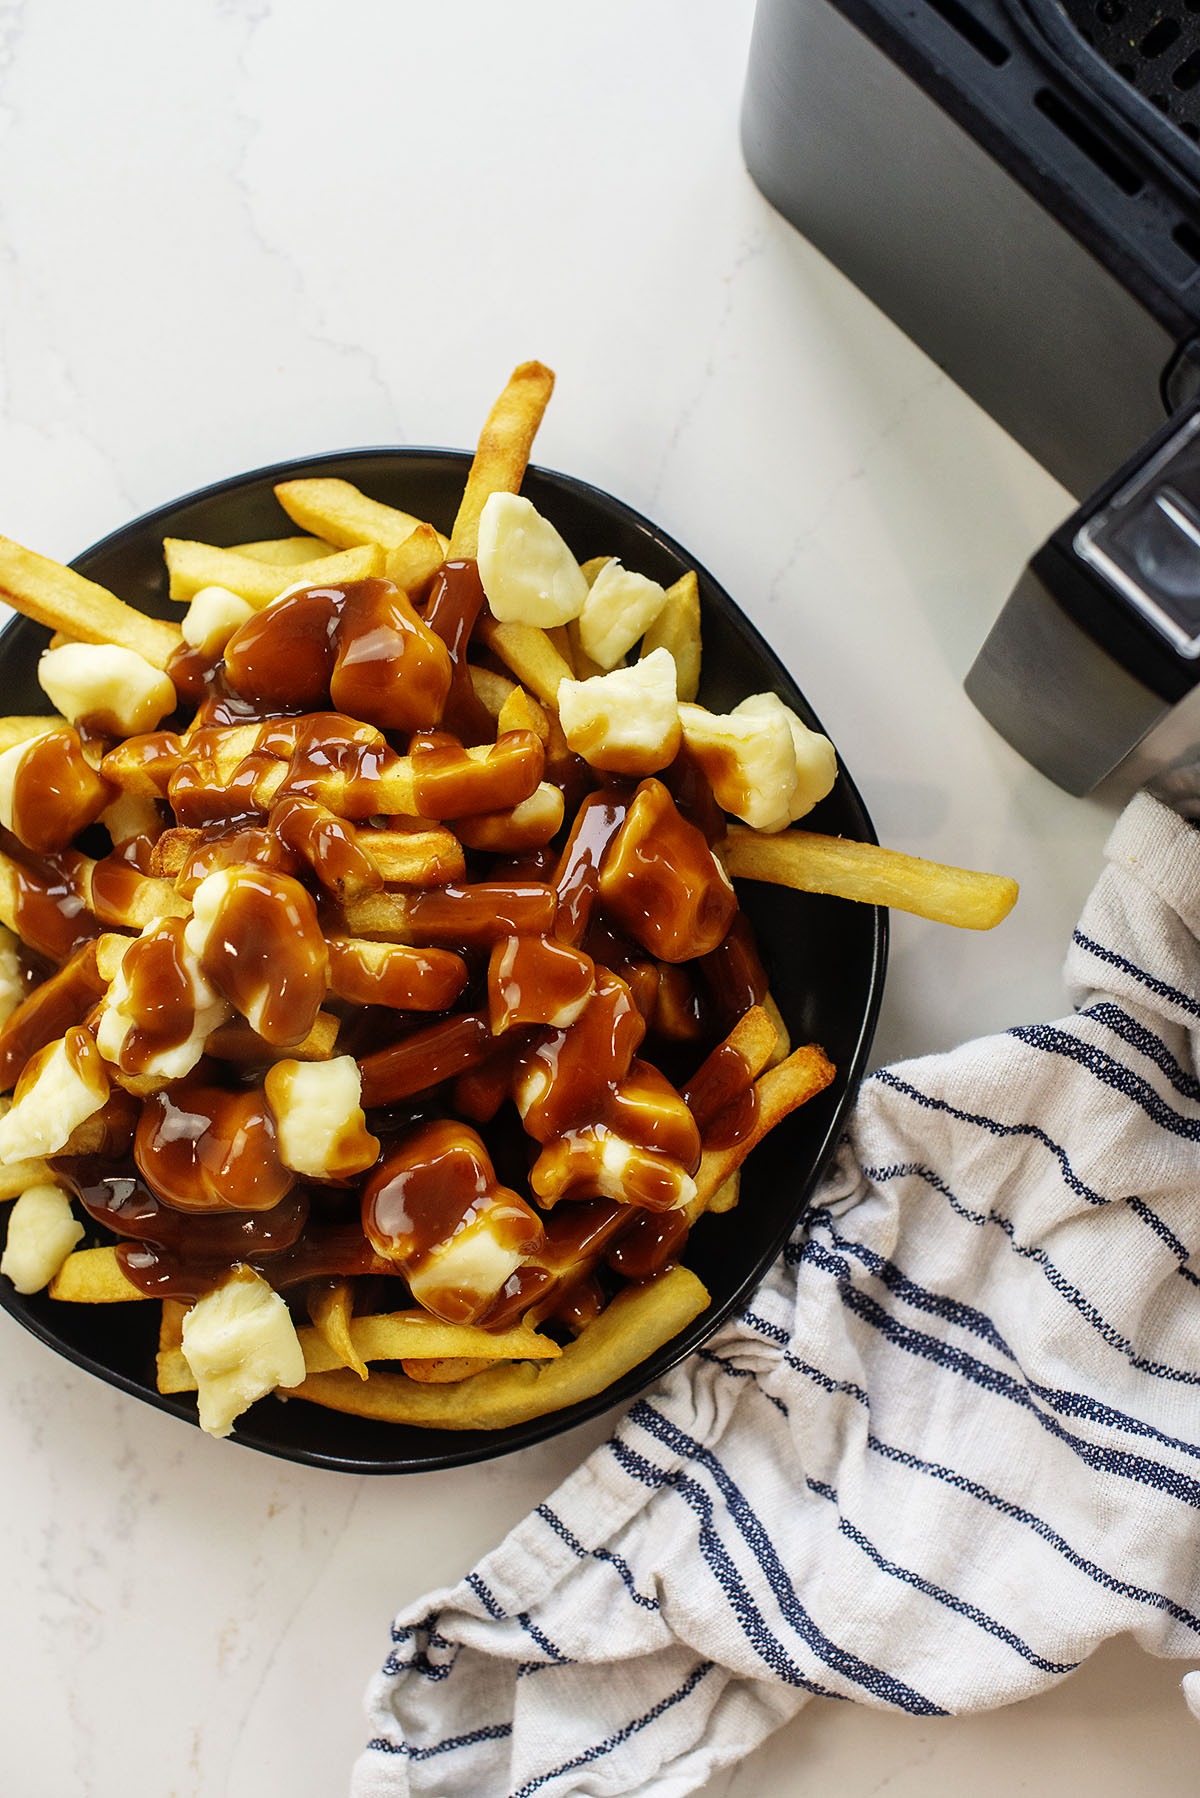 A plate of poutine in front of an air fryer basket.